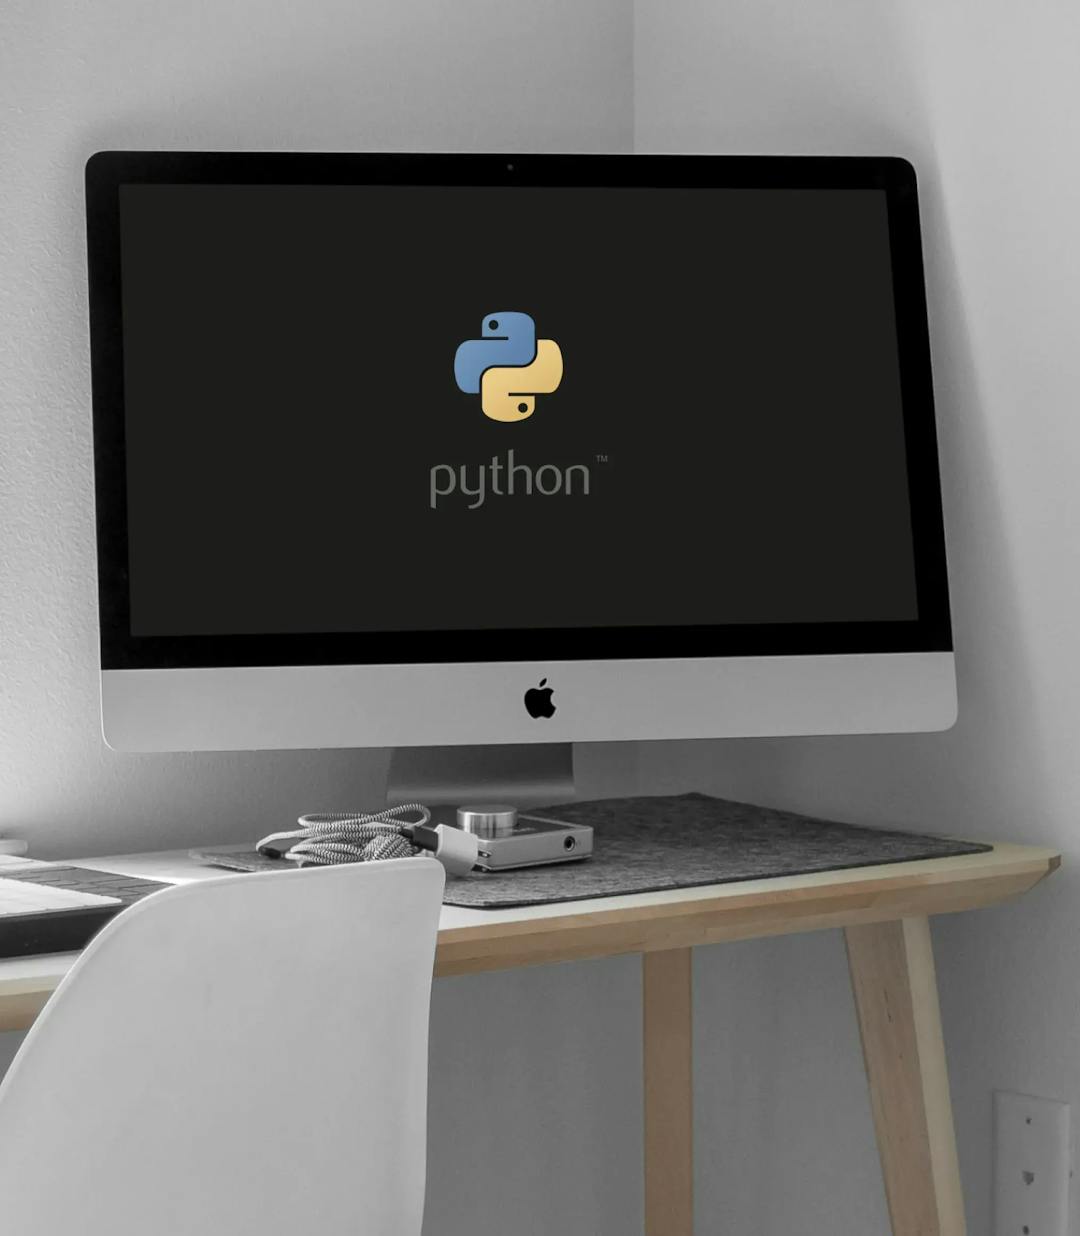 What’s behind all the hype about Python? Uncovering the reasons for unprecedented success.